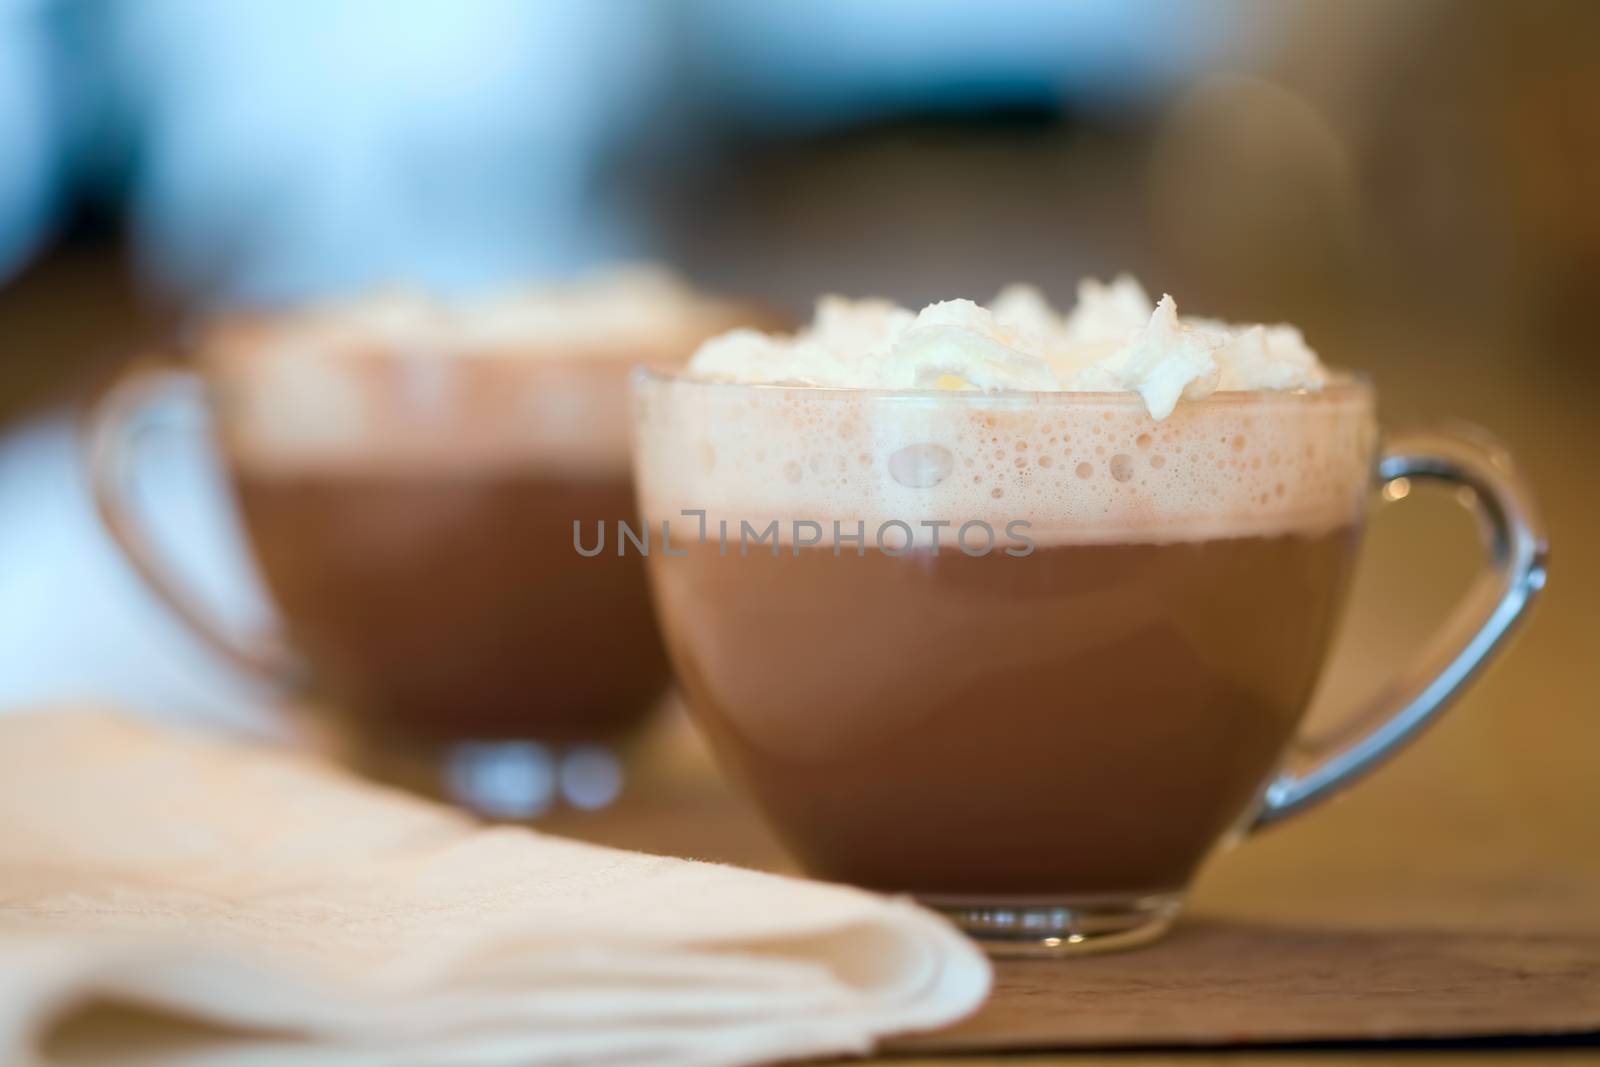 Two cups of hot cocoa or coffee on wood table background